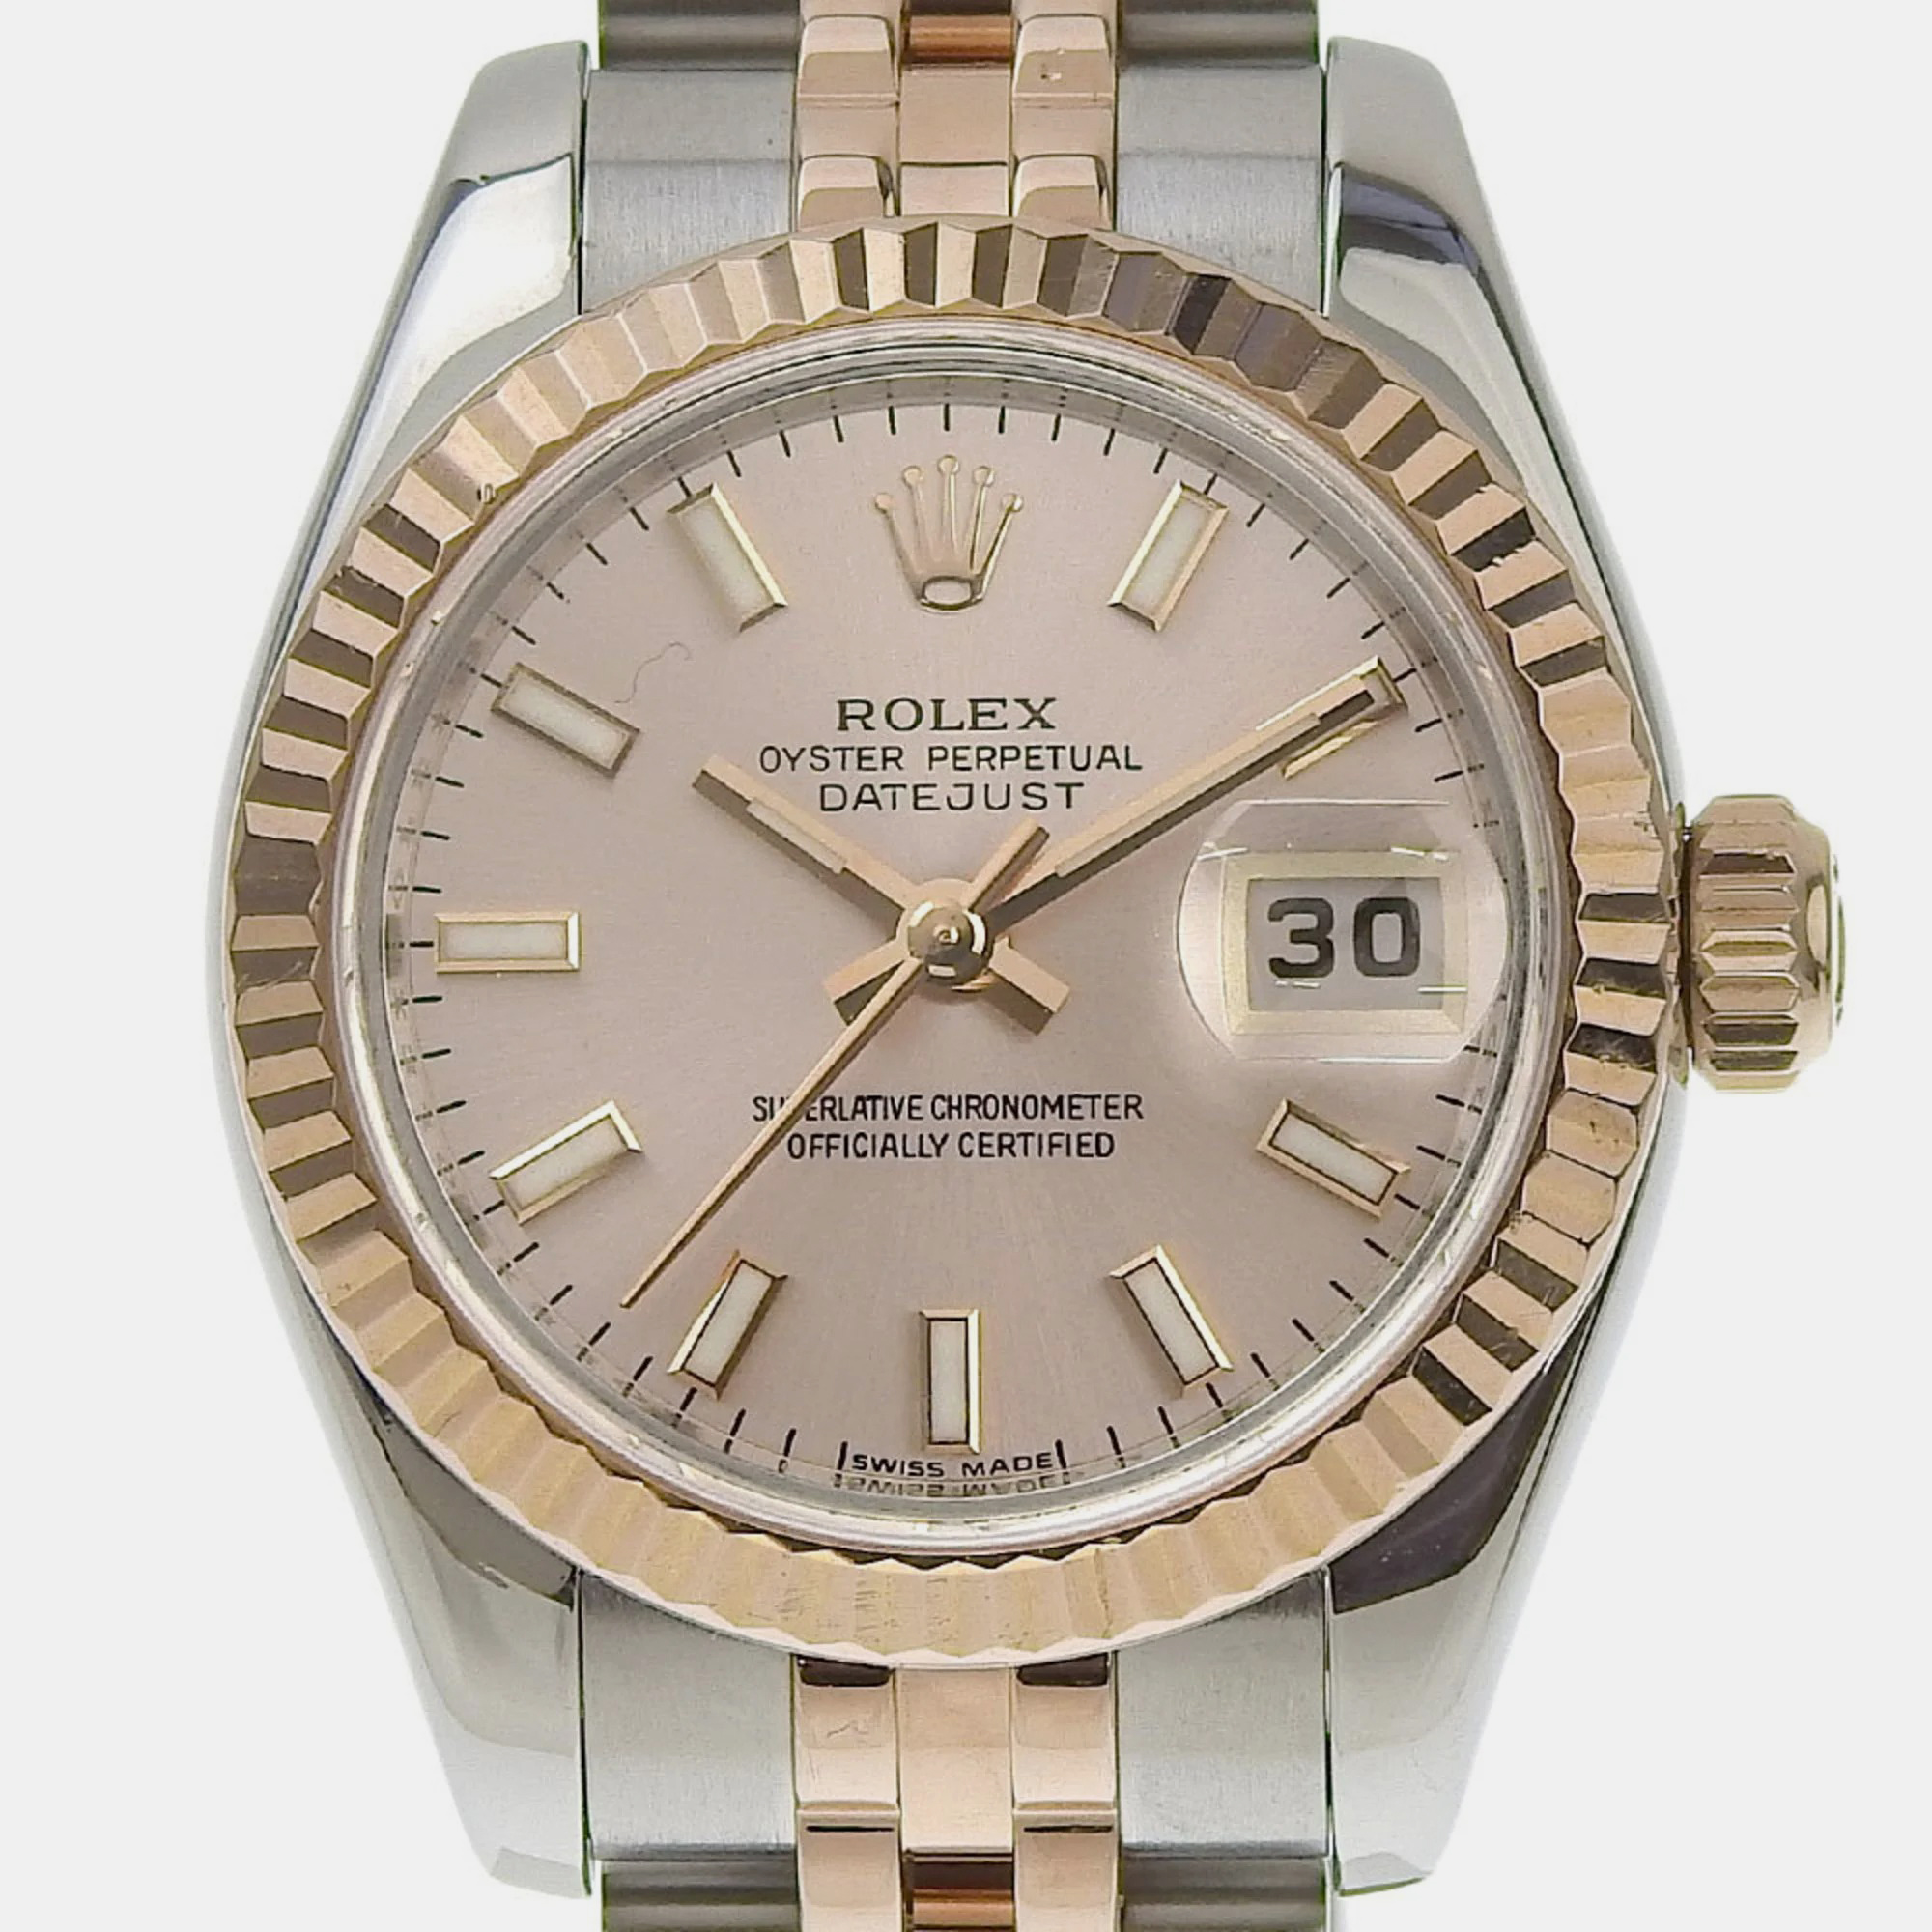 Pre-owned Rolex Pink 18k Rose Gold Stainless Steel Datejust 179171 Automatic Women's Wristwatch 26 Mm